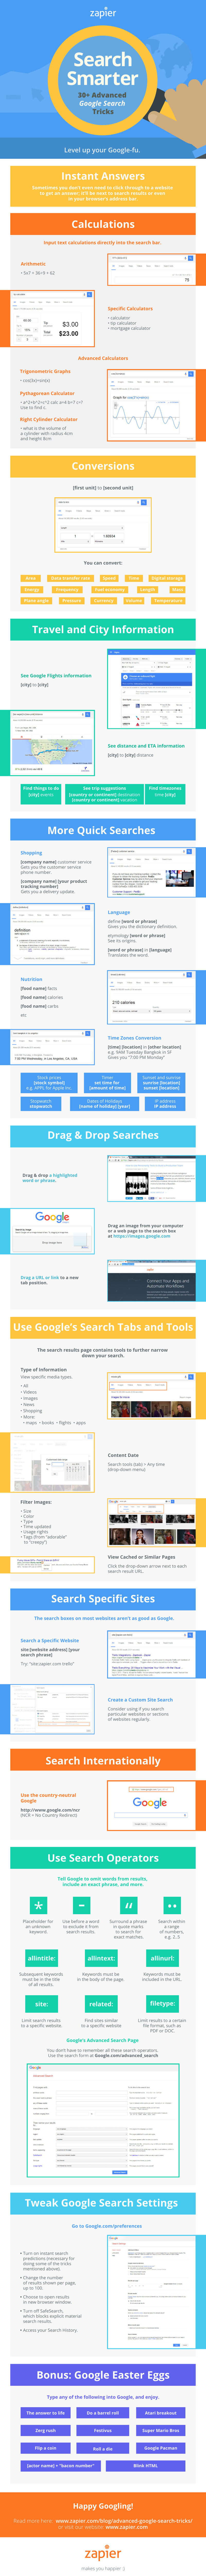 This Infographic Crams In Over 30 Essential Google Search Tips